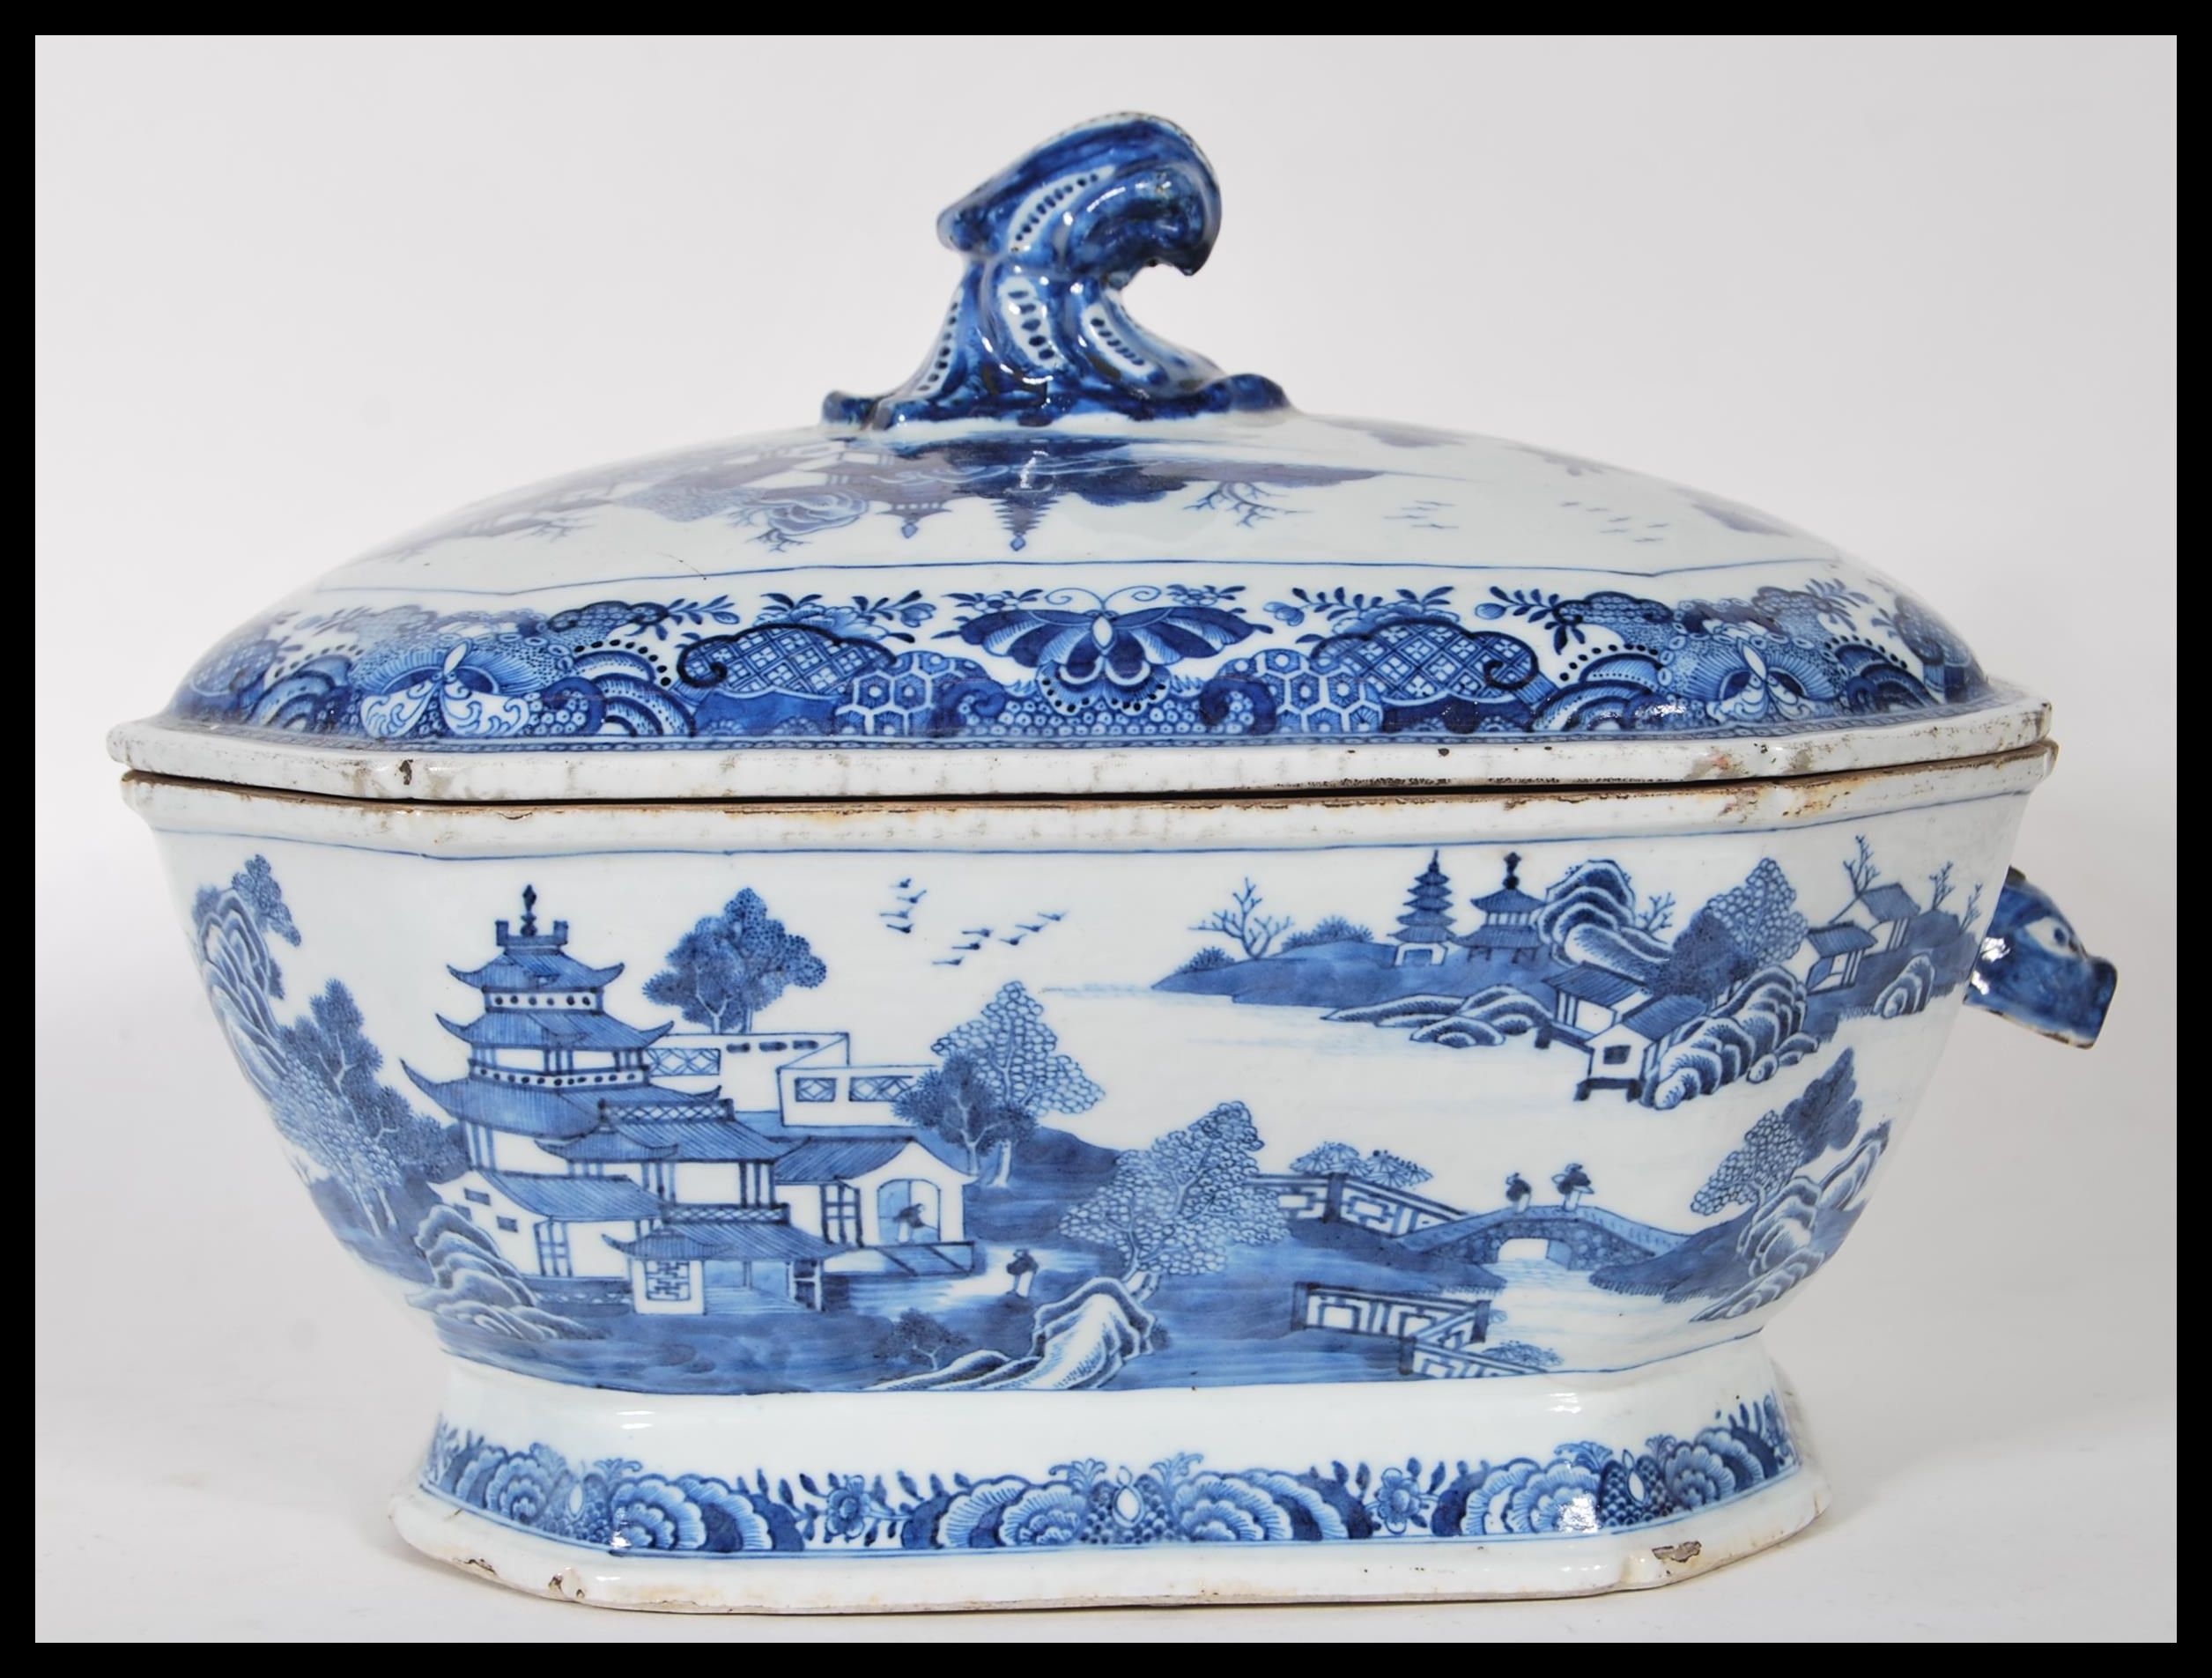 An early 18th century Chinese blue and white large tureen and lid having chinoiserie decoration with